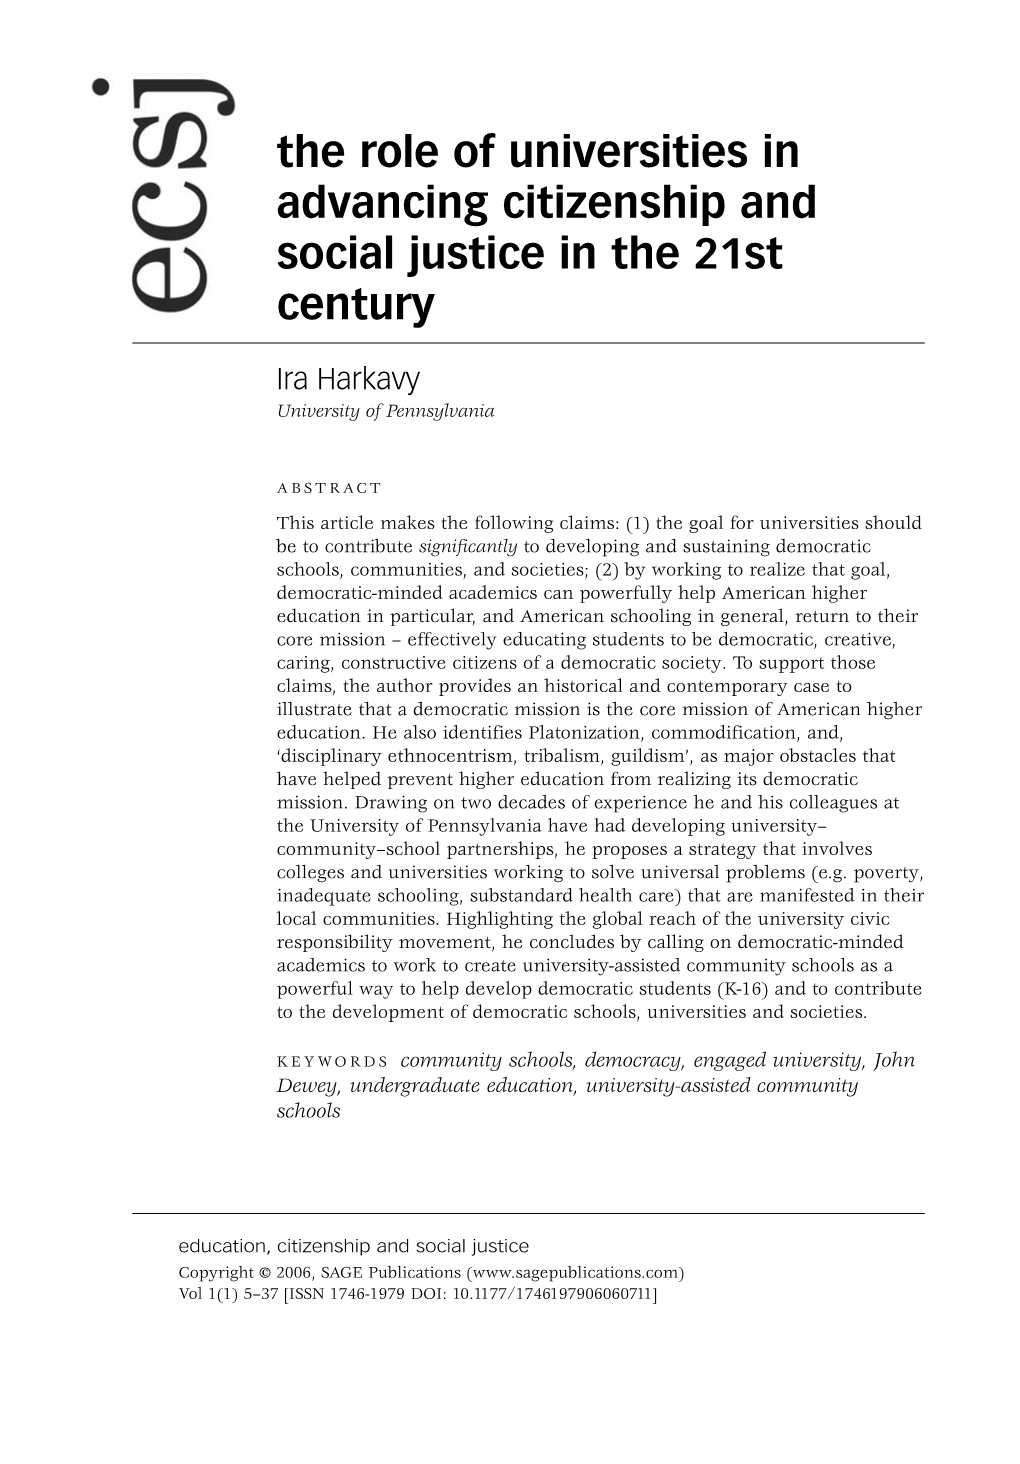 The Role of Universities in Advancing Citizenship and Social Justice in the 21St Century